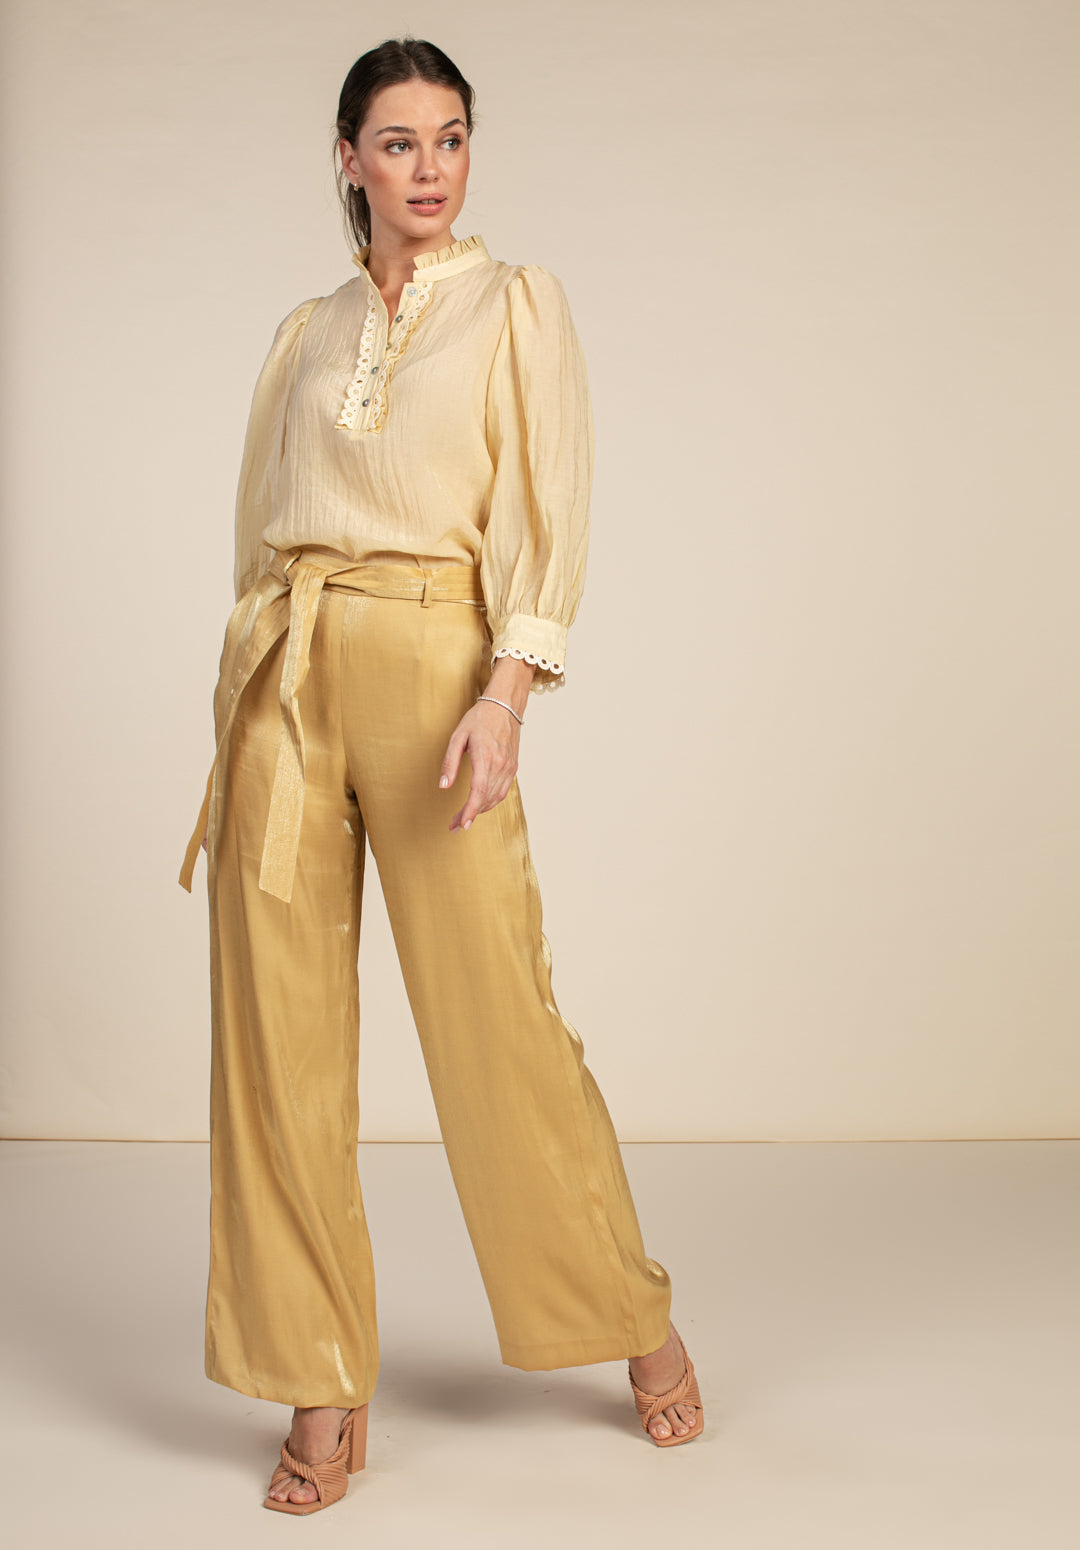 Searle Shimmery Pants Olive